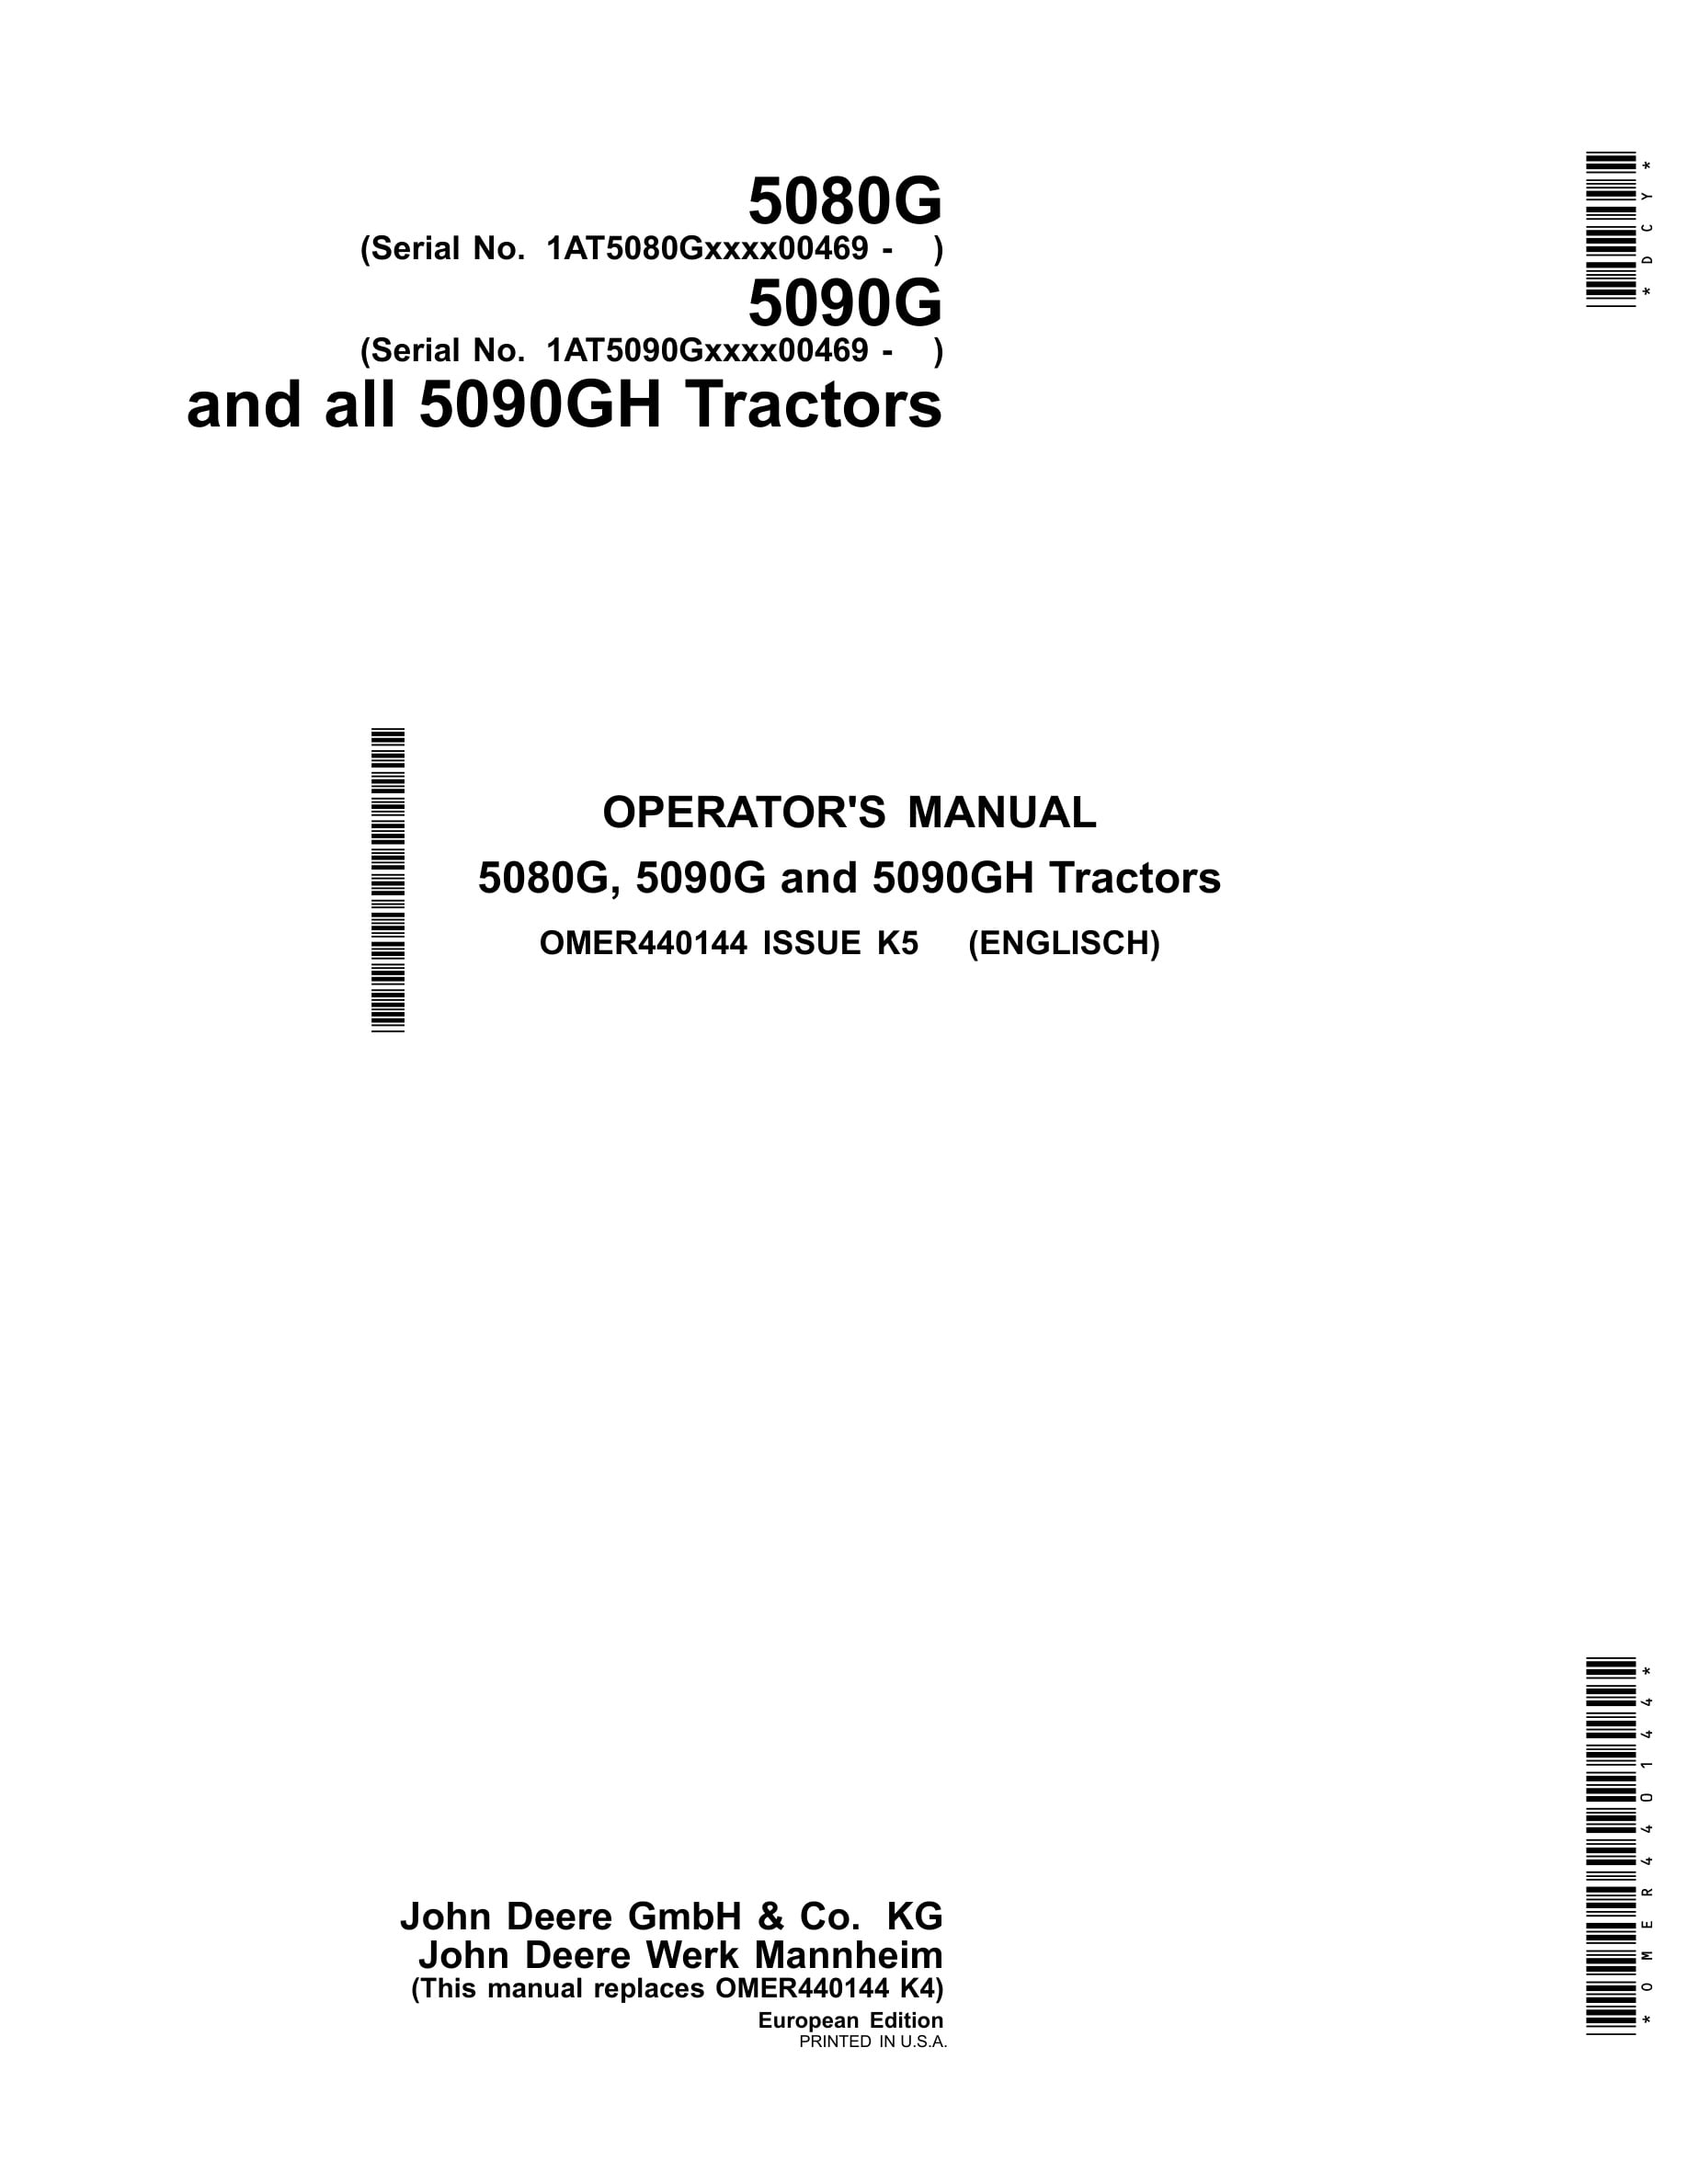 John Deere 5080g, 5090g And 5090gh Tractors Operator Manuals OMER440144-1